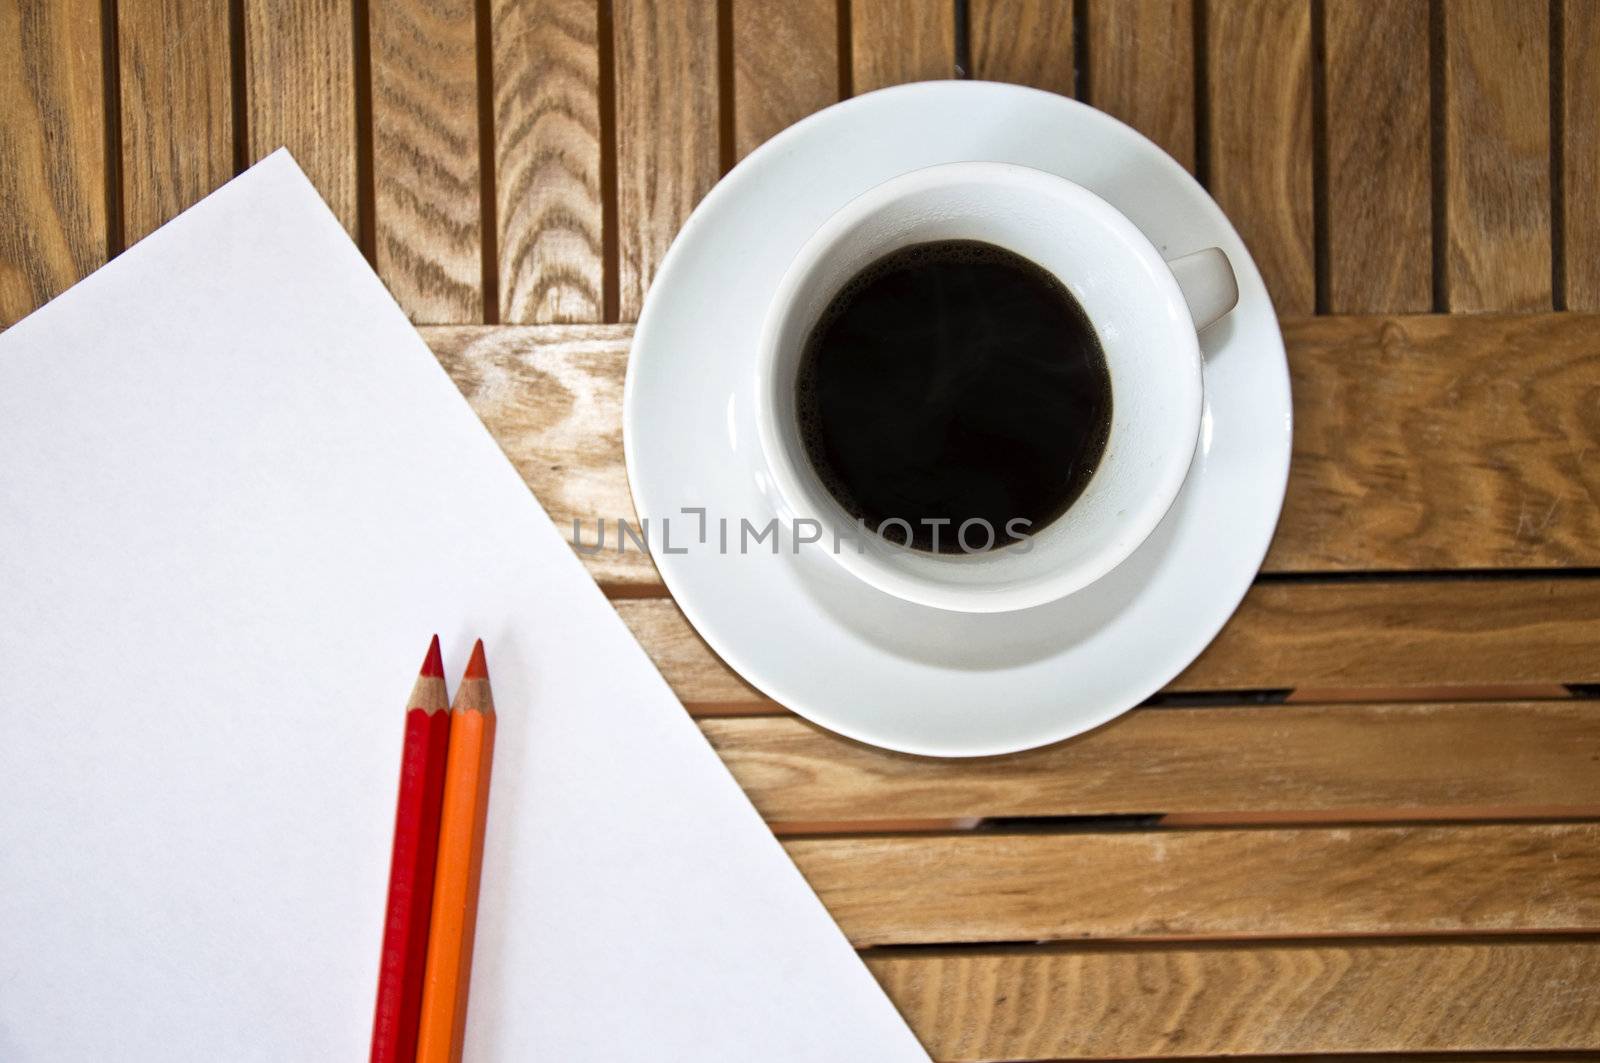 Paper blank Sheet, color pencil and a cup of coffee on a wooden table.